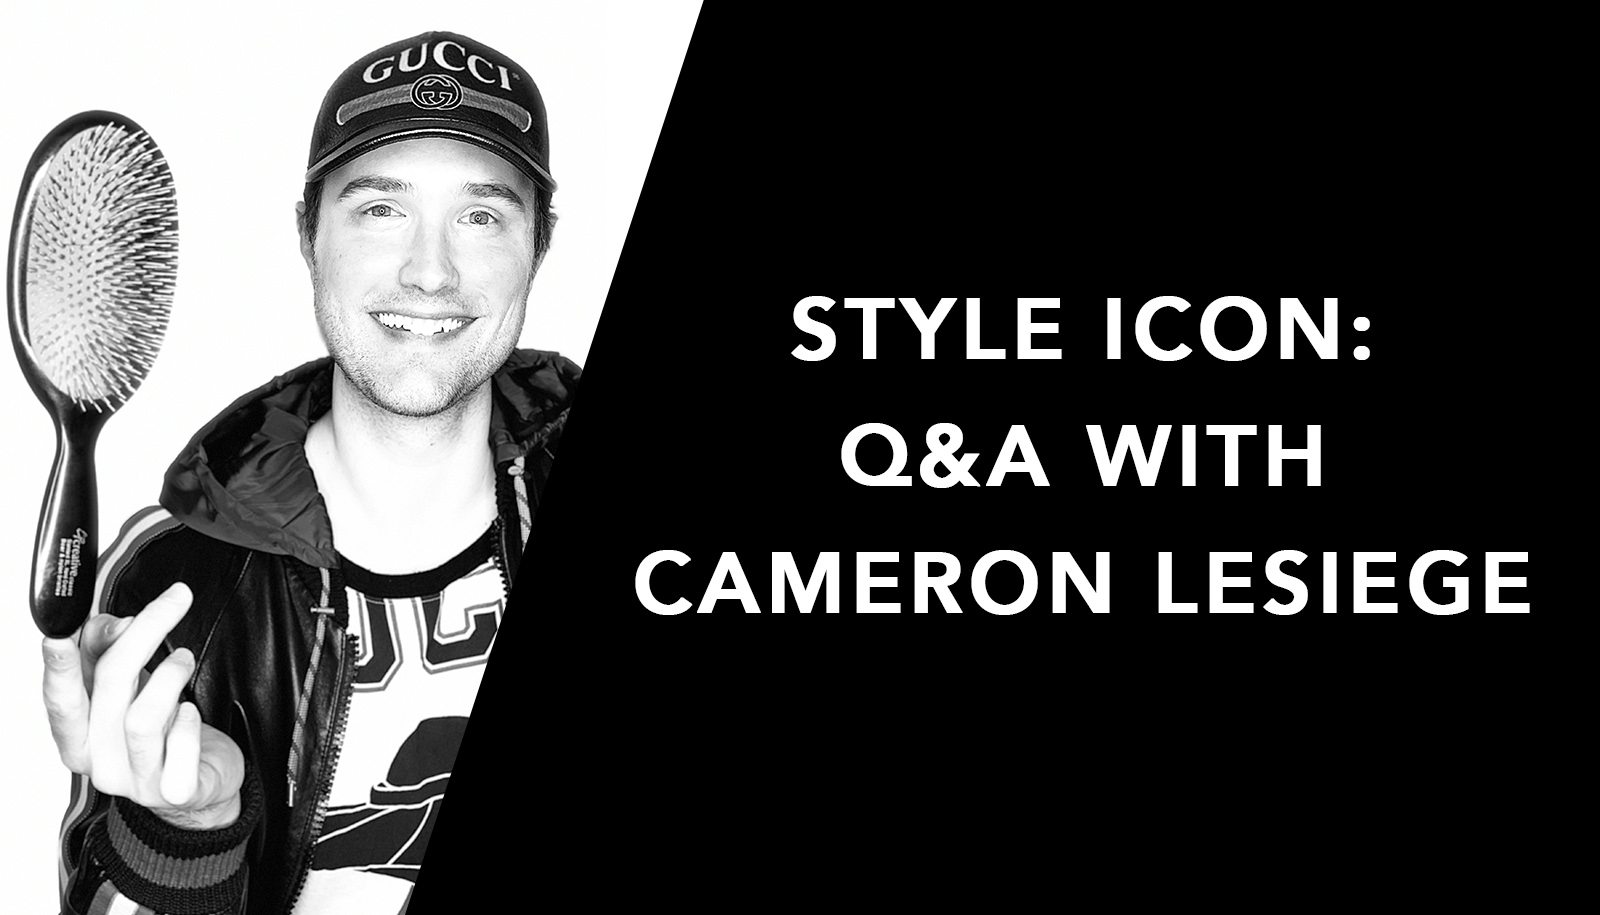 Style Icon: Q&A with Cameron LeSiege